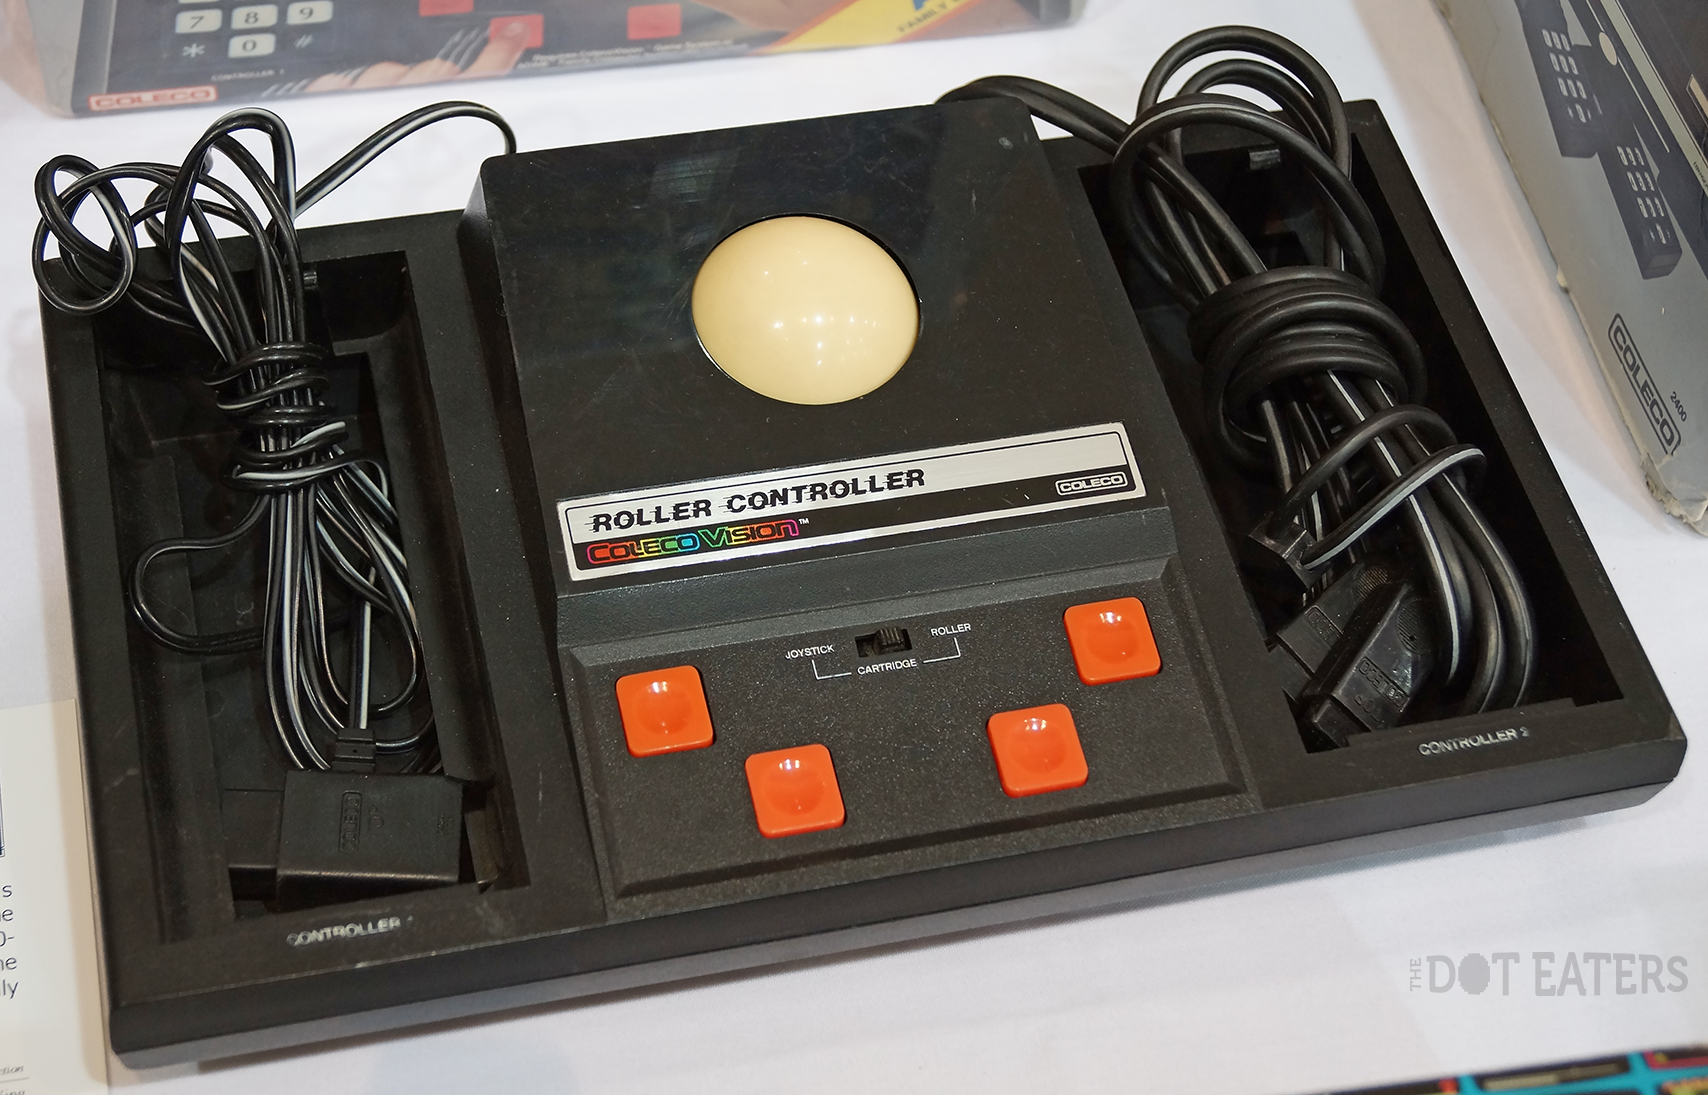 Roller Controller, a peripheral for ColecoVision, a home video game system by Coleco, 1983